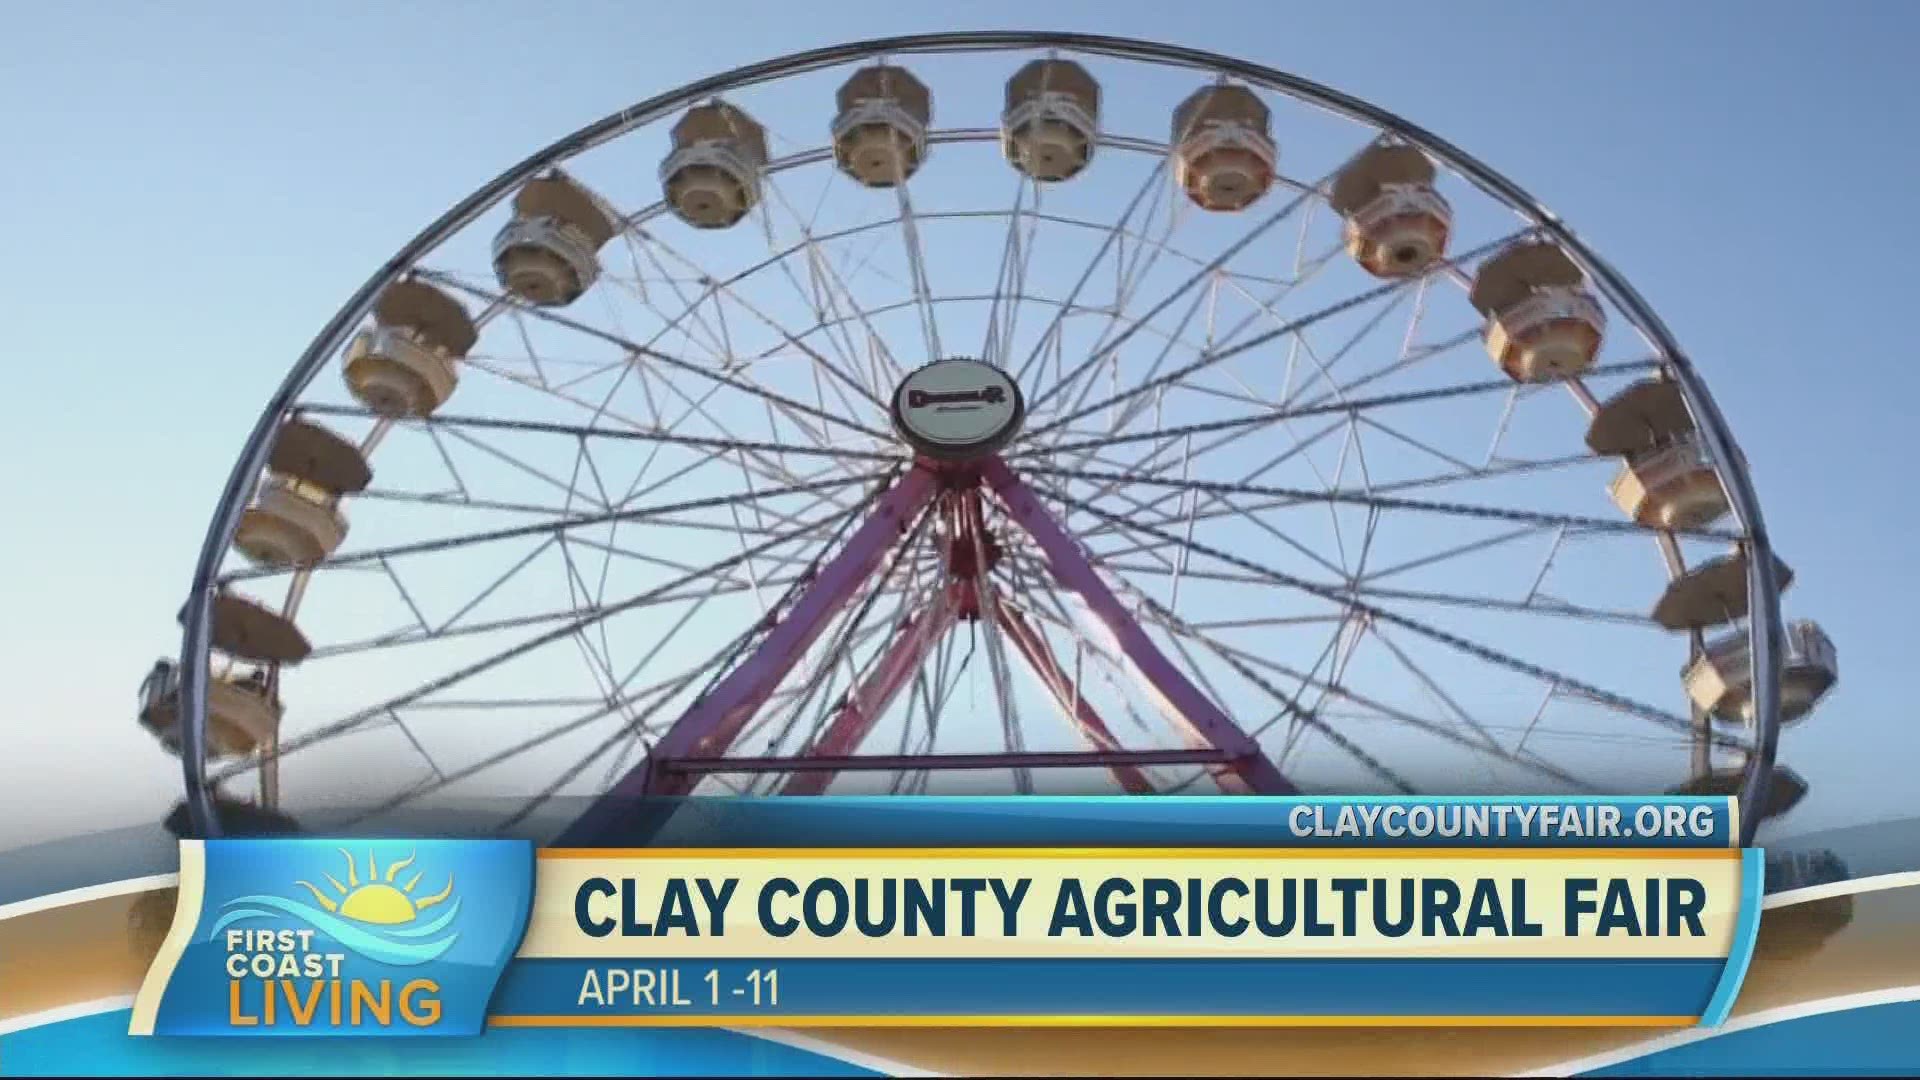 Everybody is excited to get back out for some family fun. The Clay County Fair is the place to be!